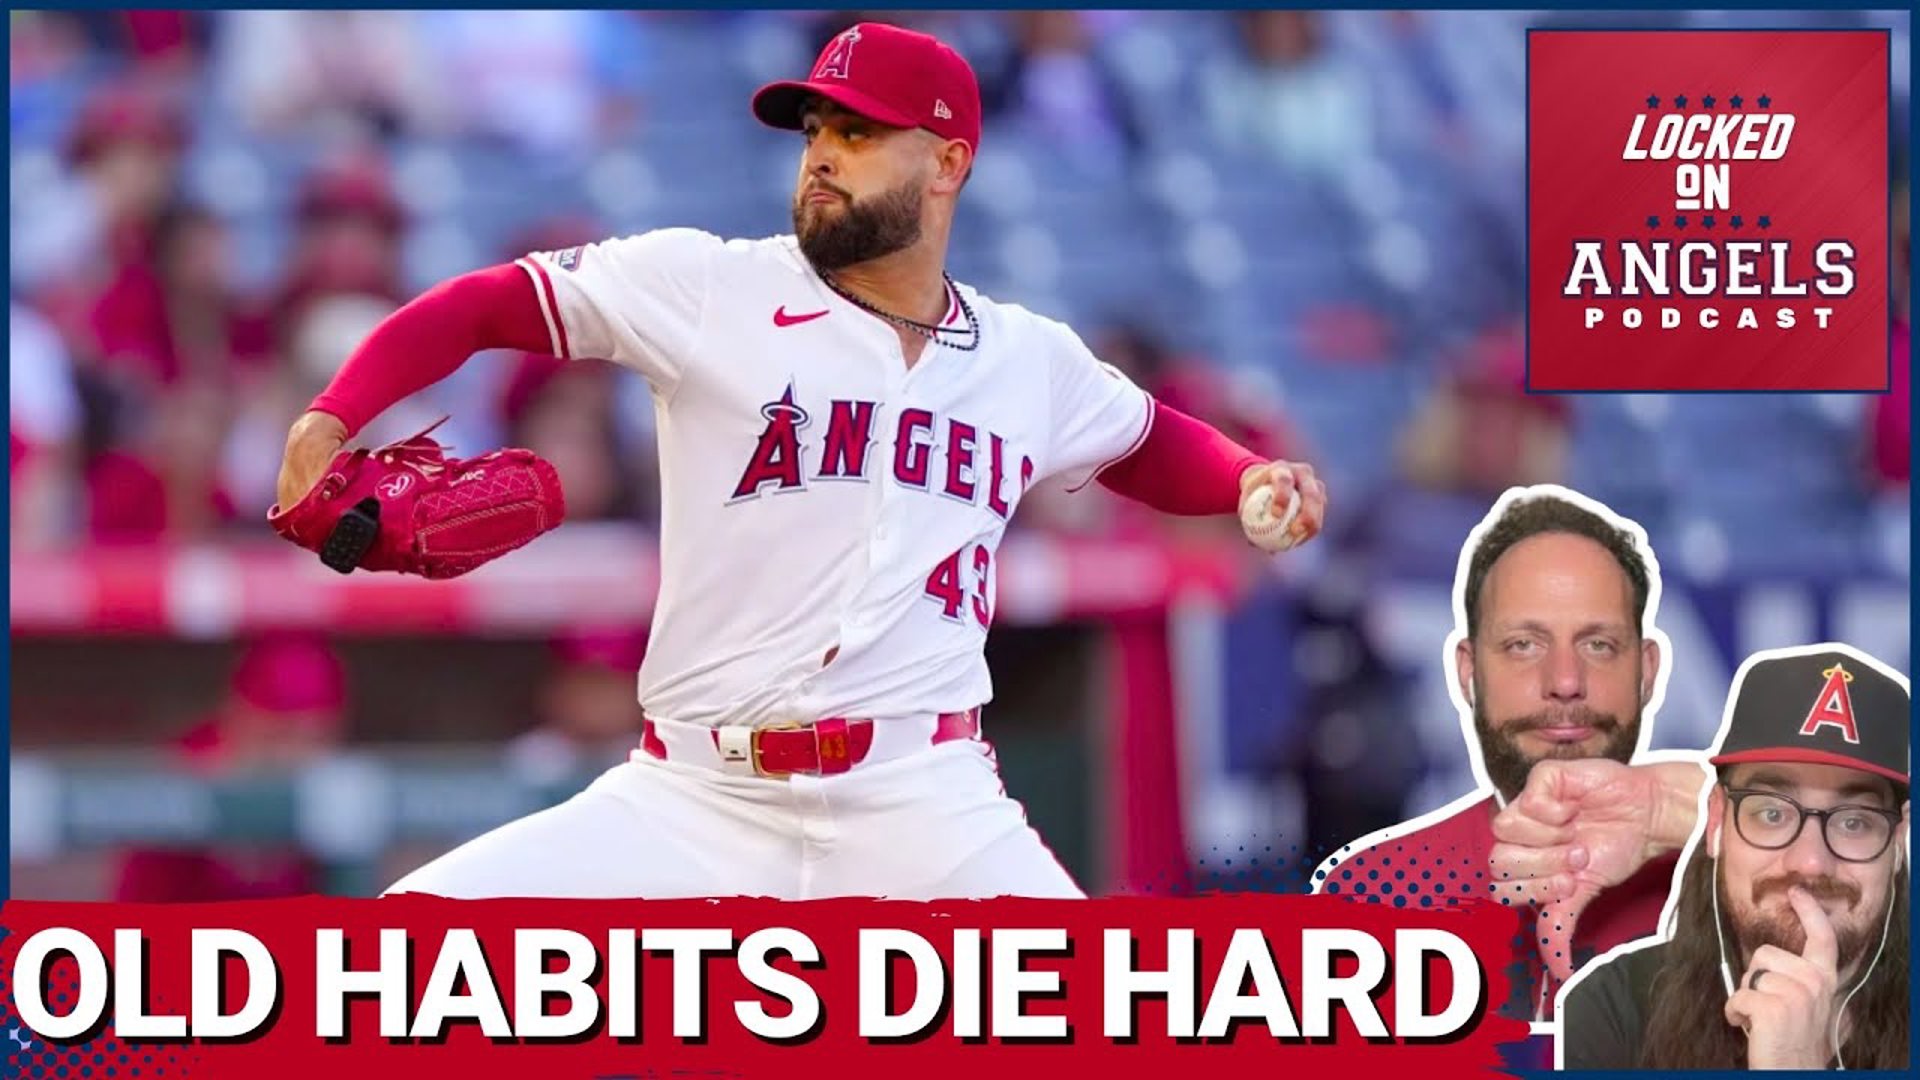 The Los Angeles Angels took 3 losses in a row this weekend, as they were swept by the Cleveland Guardians at home.